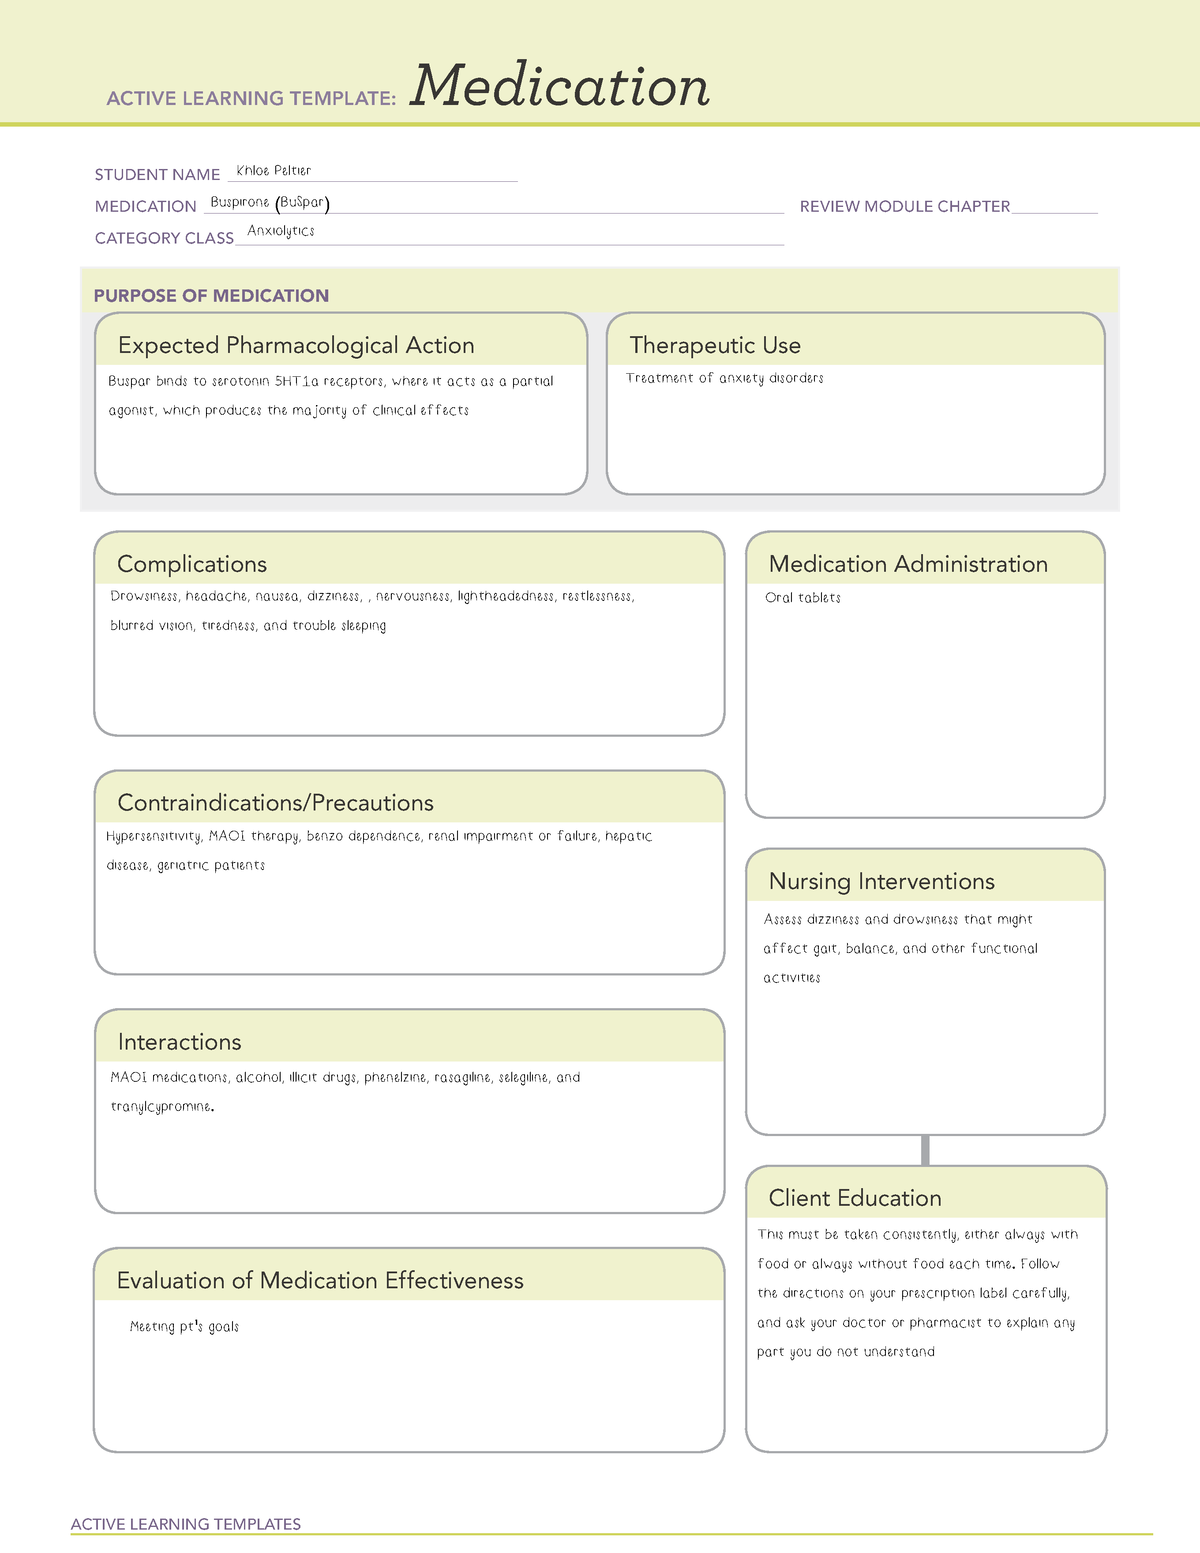 Buspirone Medication Card ACTIVE LEARNING TEMPLATES Medication